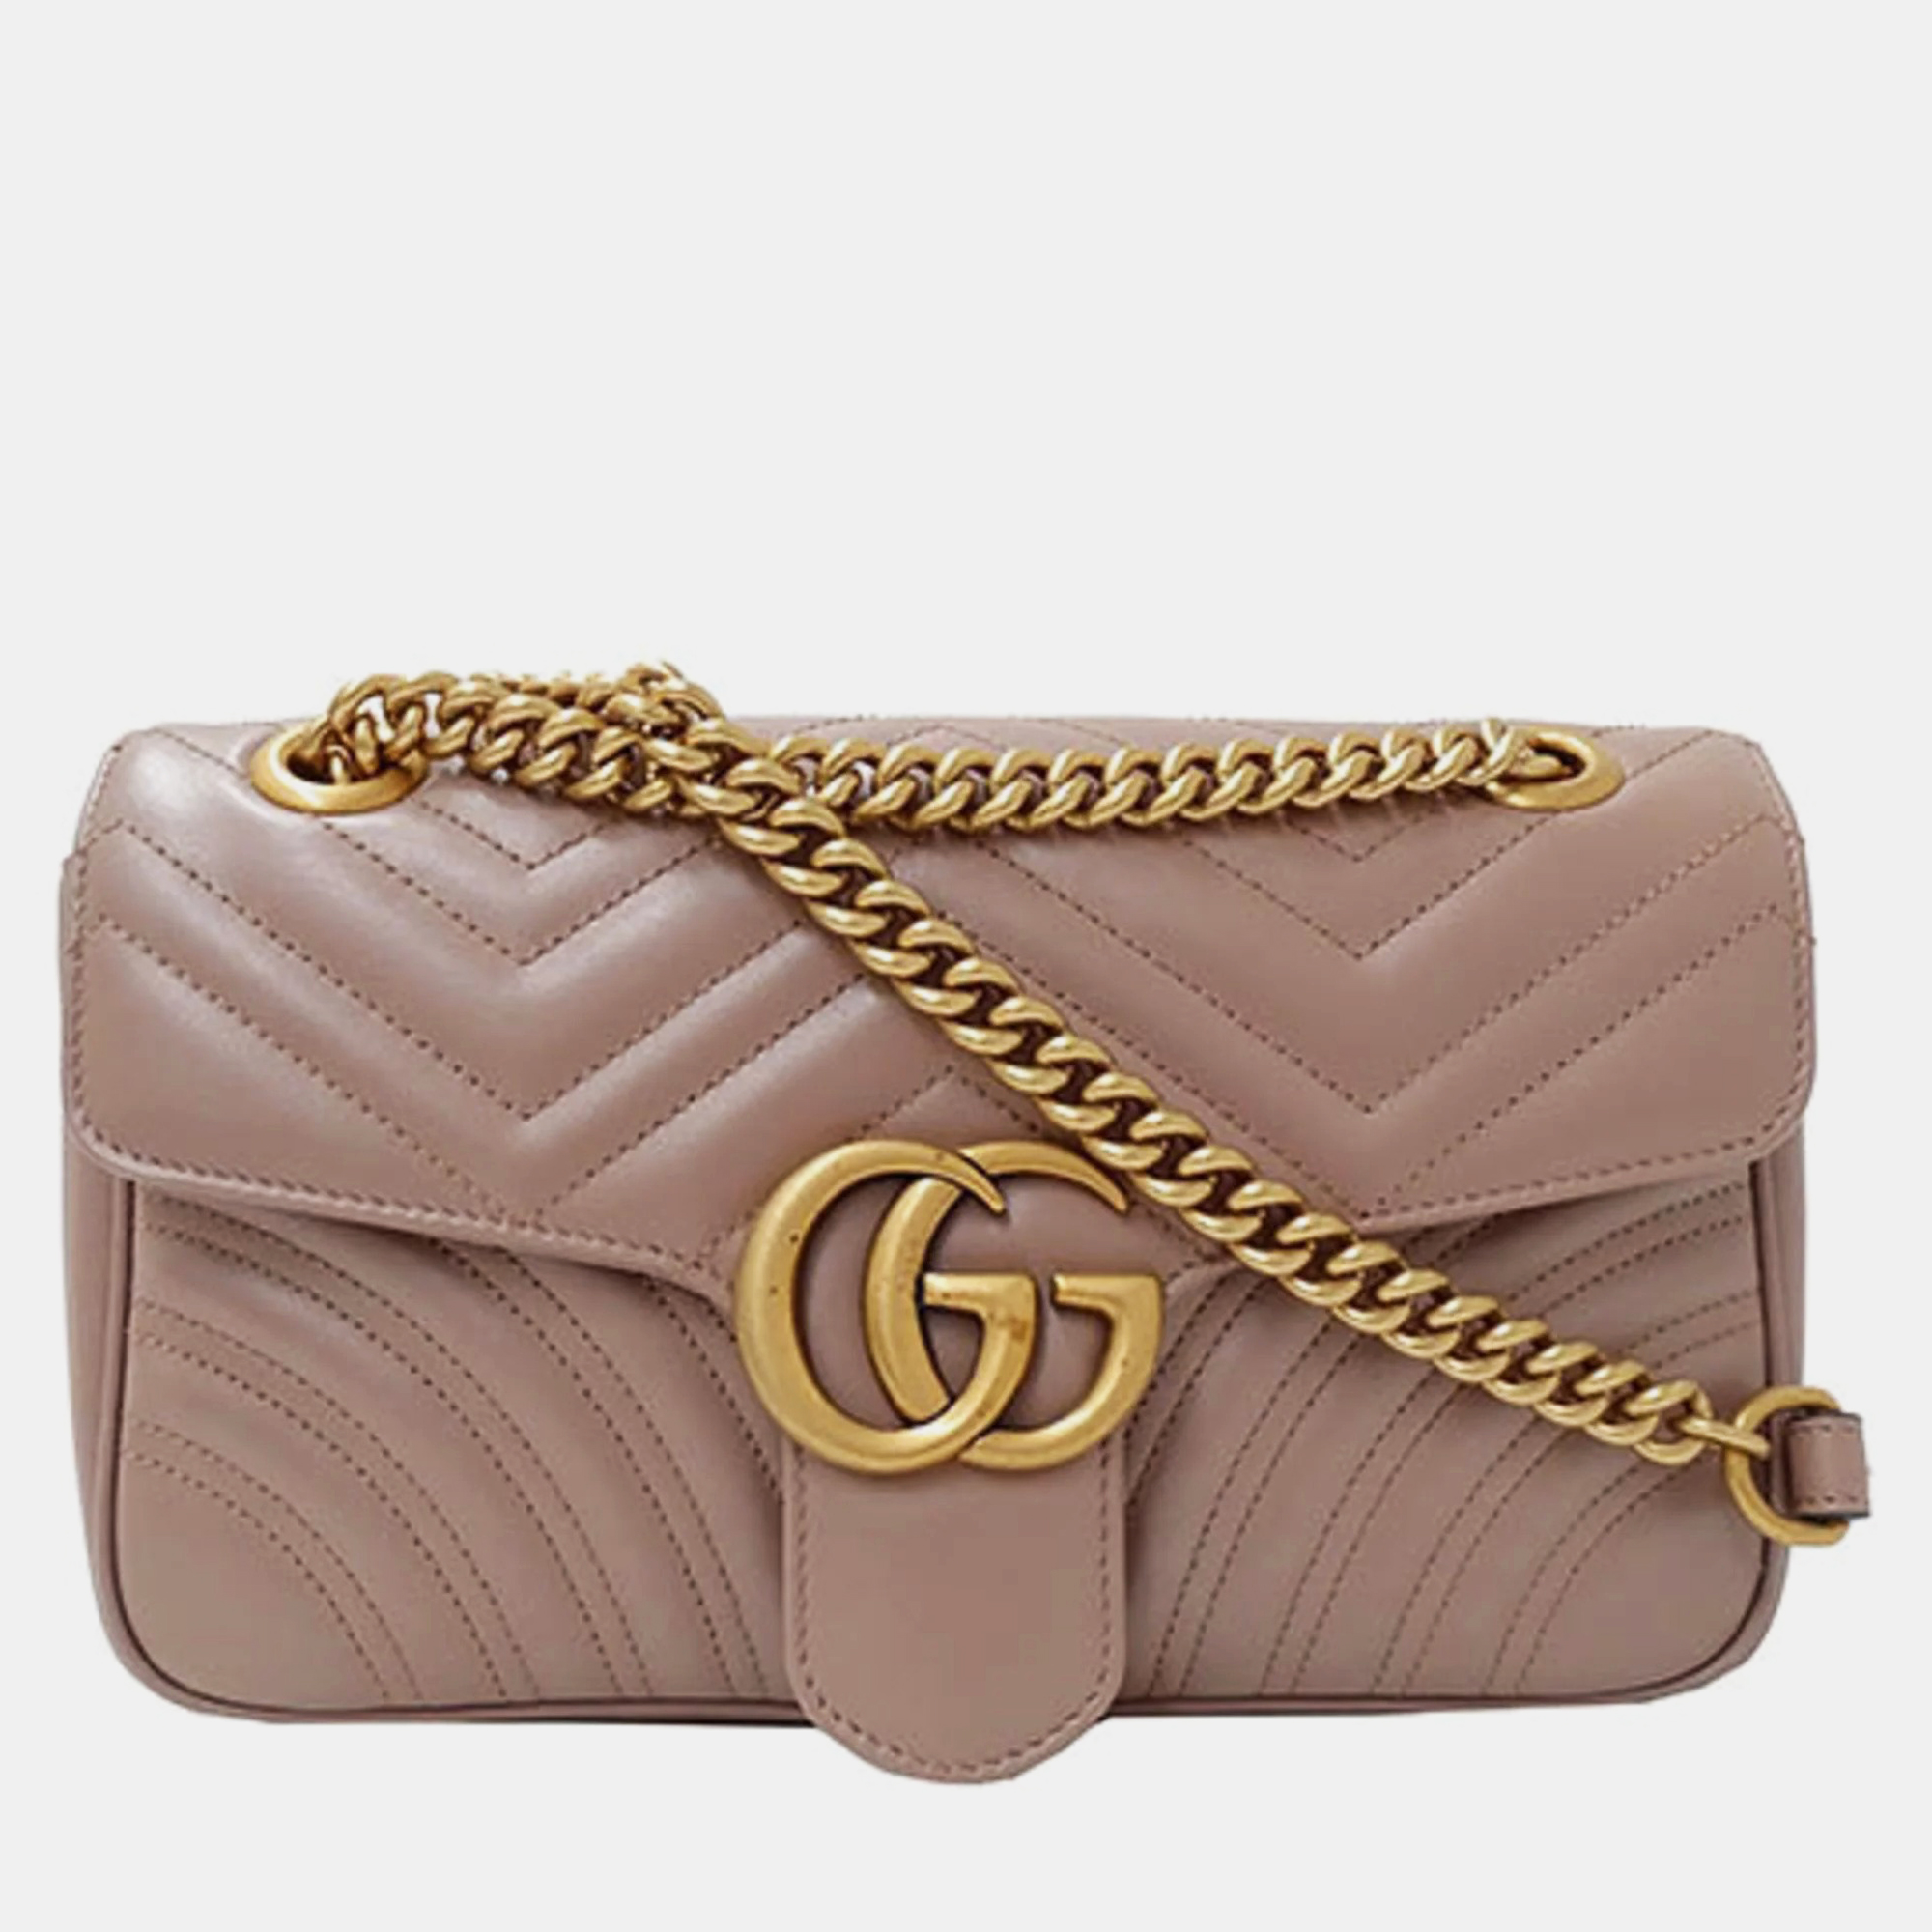 Gucci dusty pink leather gg marmont shoulder bag